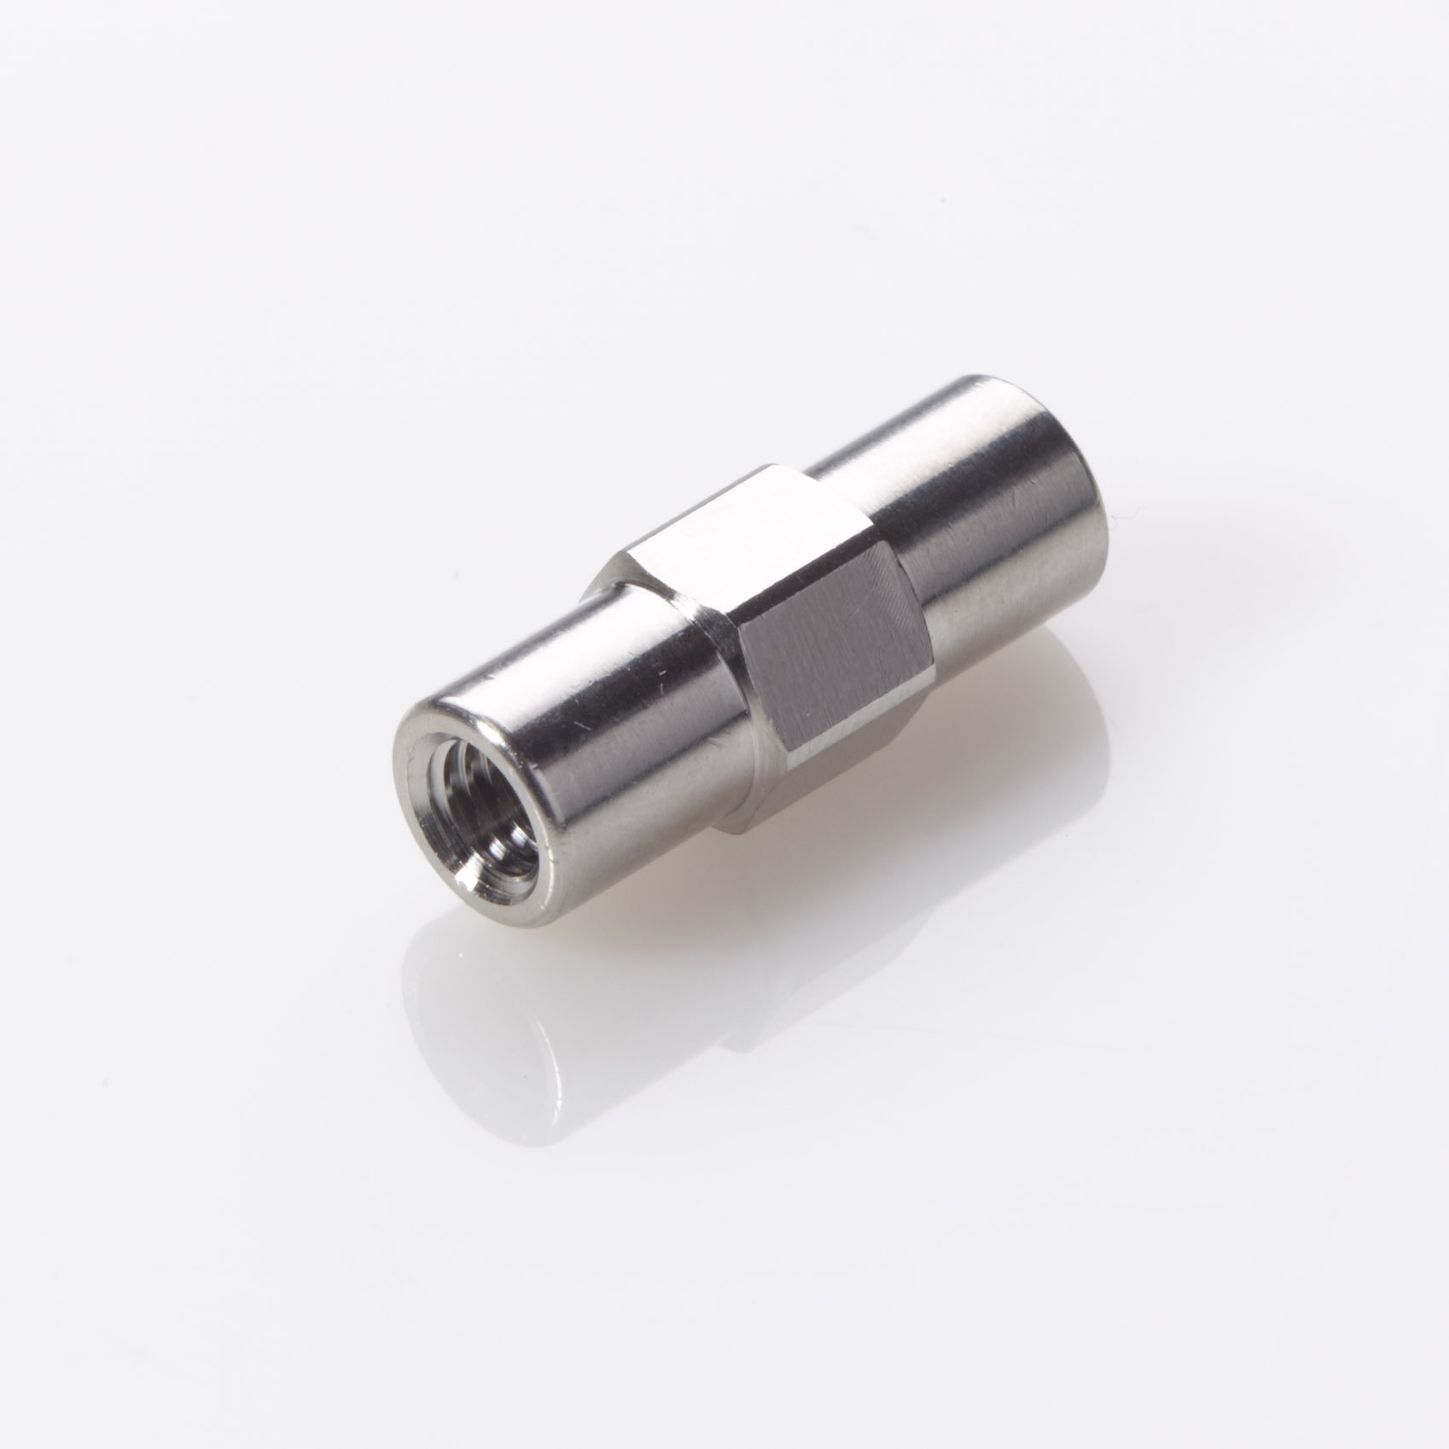 Connector Union ZDV Stainless Steel 0.010 (0.25mm) Thru-Hole for 1/16" OD Tubing (Union Body Only)